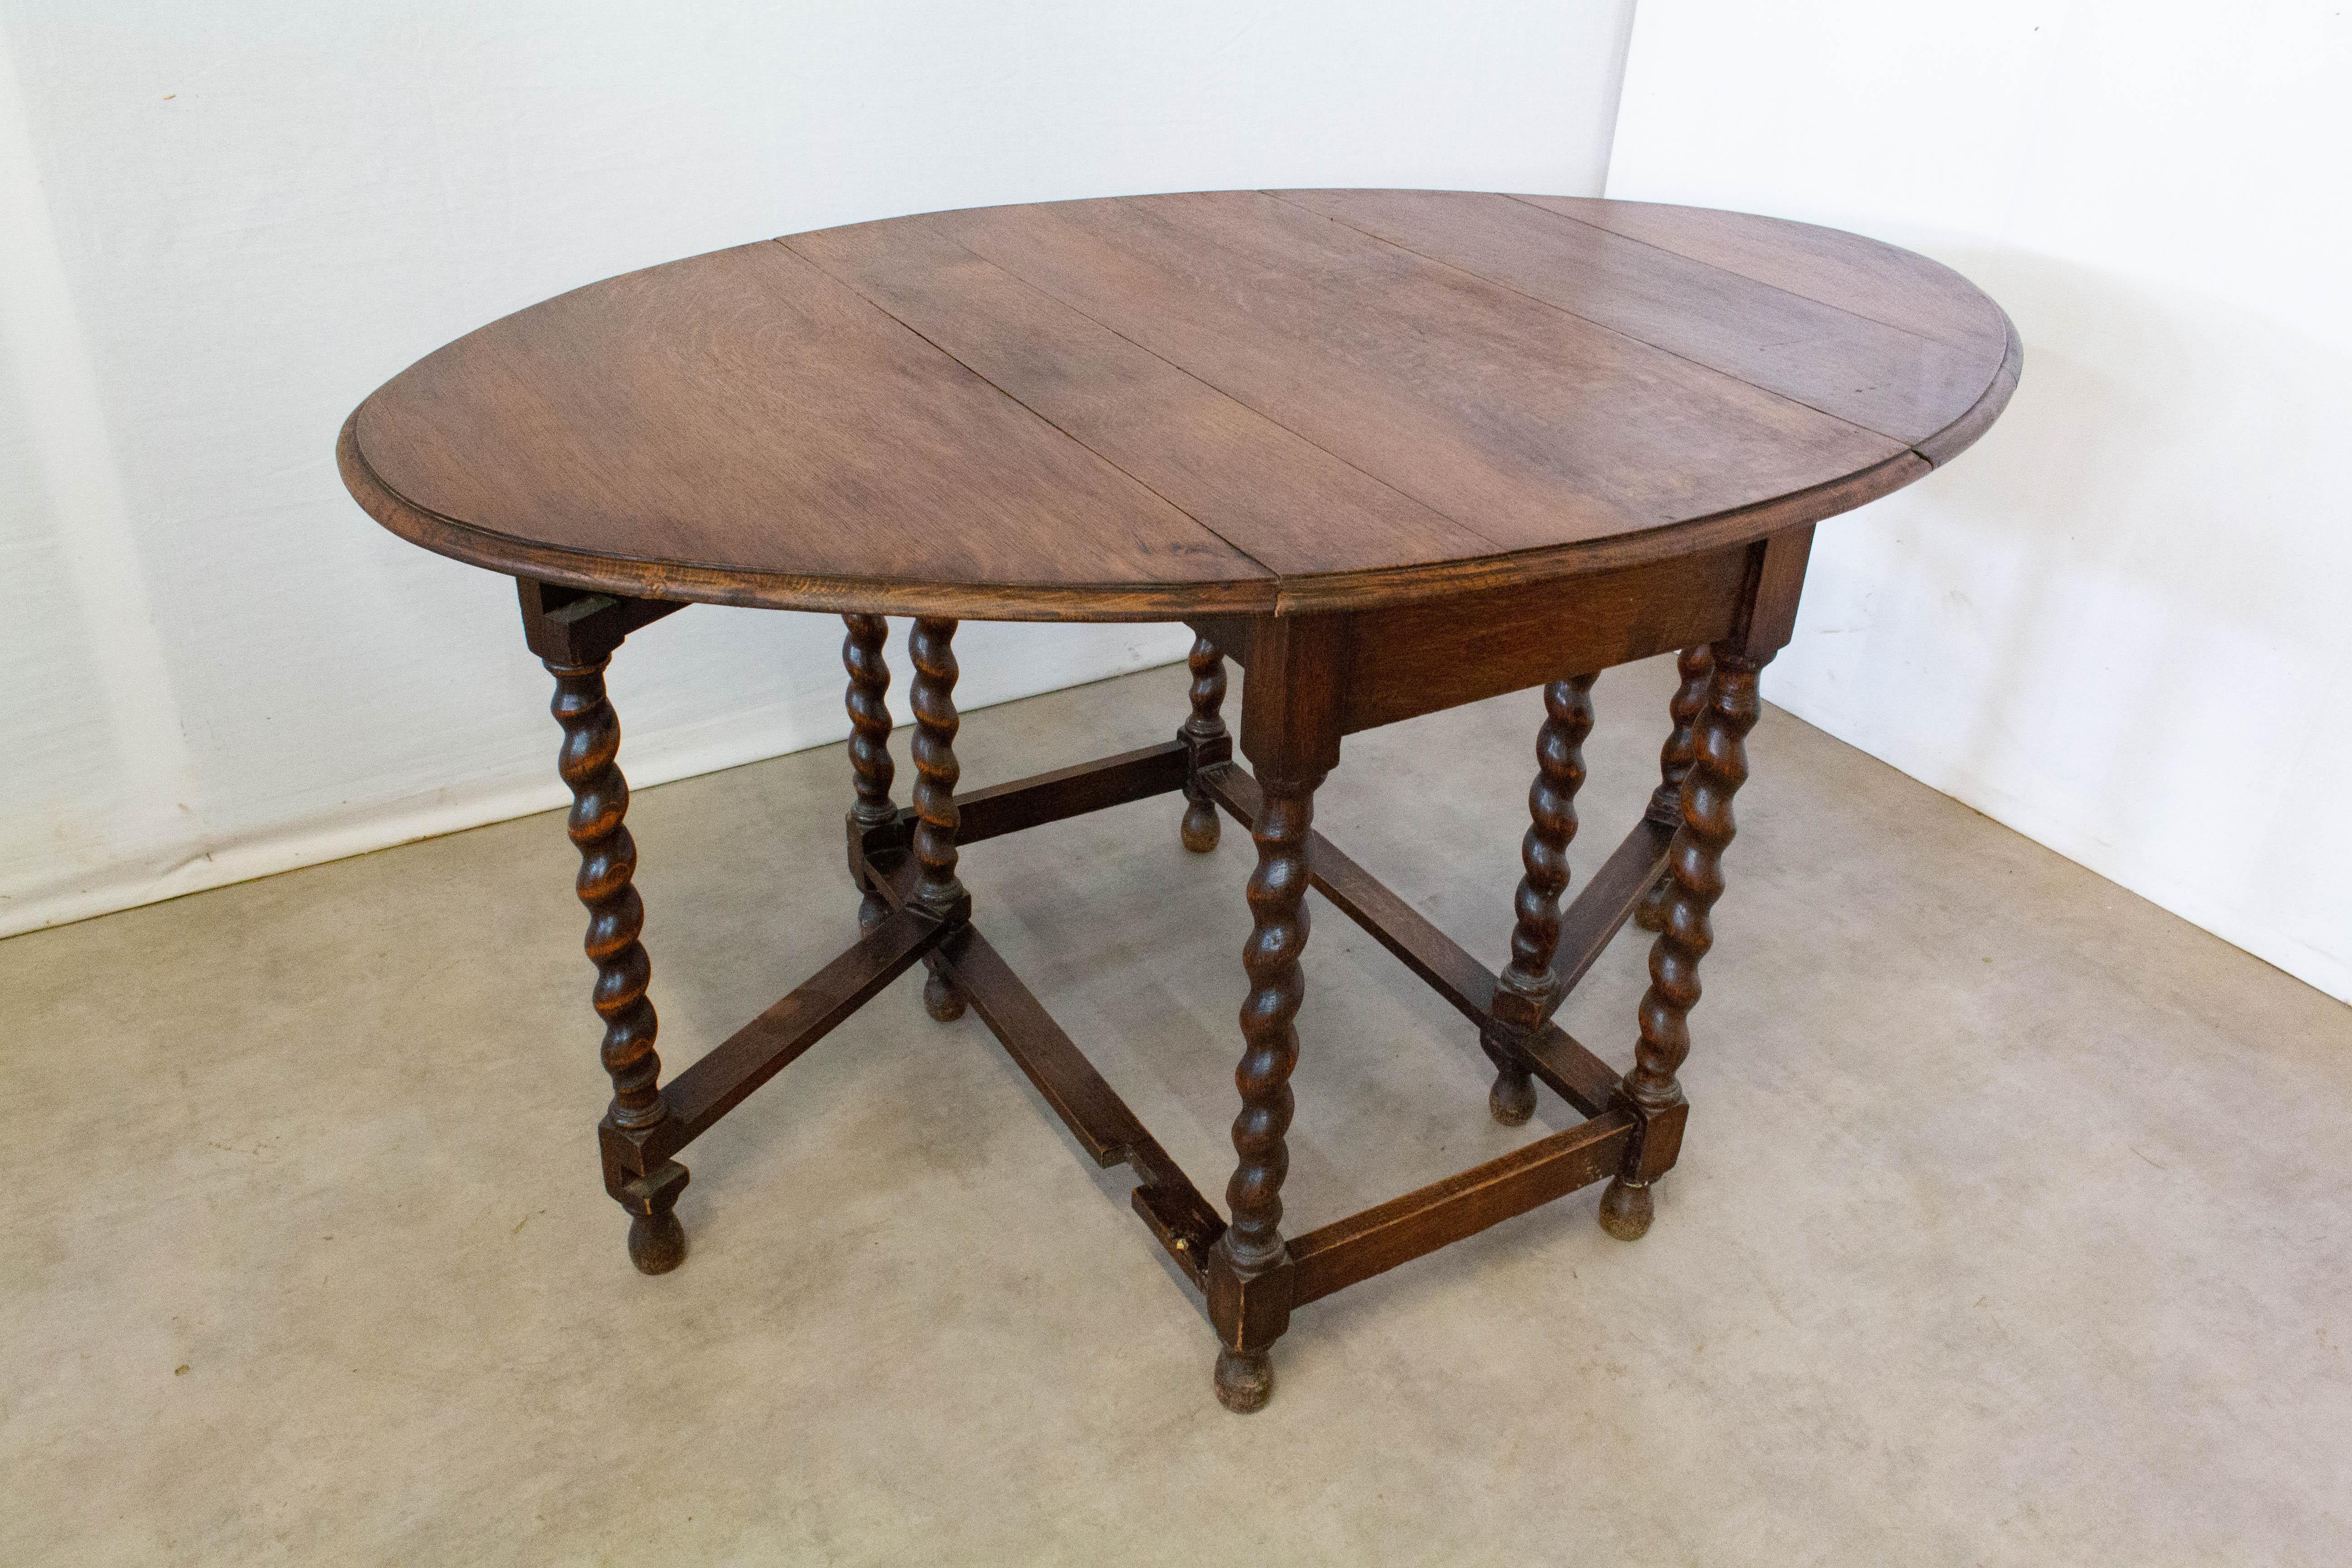 Dining folding table with oval top, oak
Barley twist gate leg and drop leaf
Early 19th century, English
Dimensions when folded: D 43 x W 92 x H 72 cm
Good antique condition with very good patina.

For shipping: 43/92/H72 cm 24kg.
 